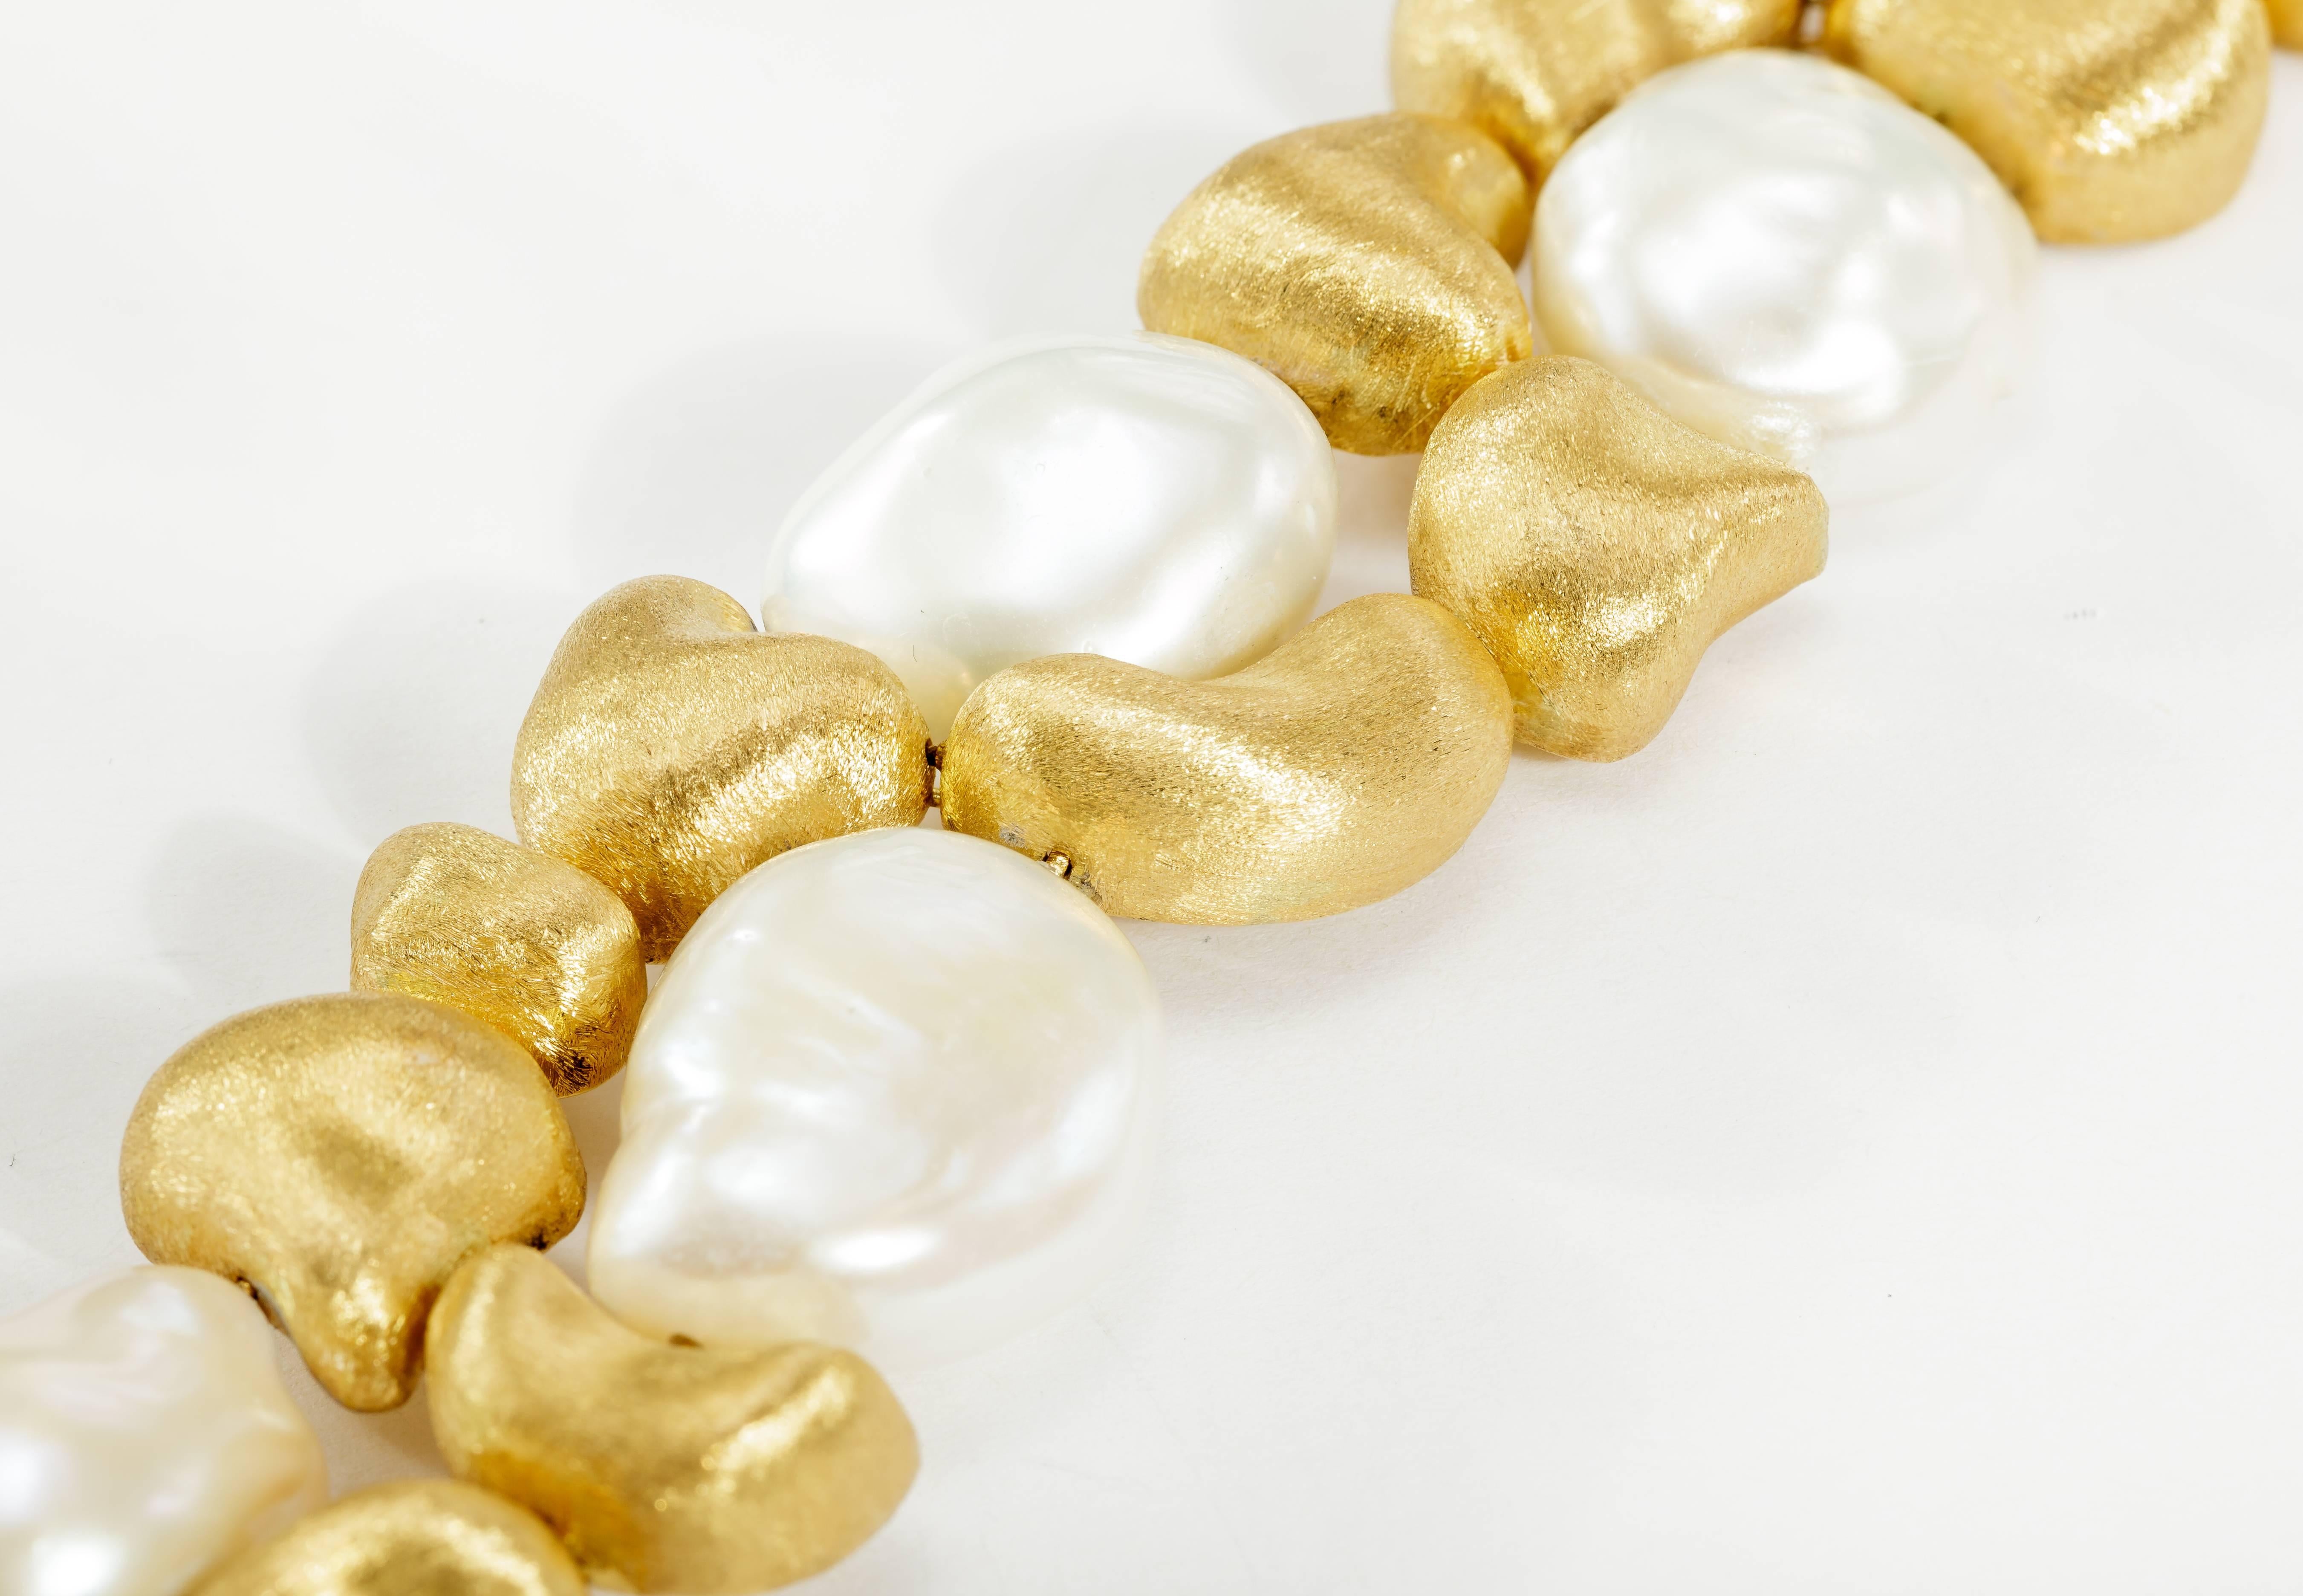 This Yvel pearl and 18k yellow gold bracelet features seven freshwater baroque pearls and yellow gold satin finish beads.  The bracelet measures 7.5 inches long.